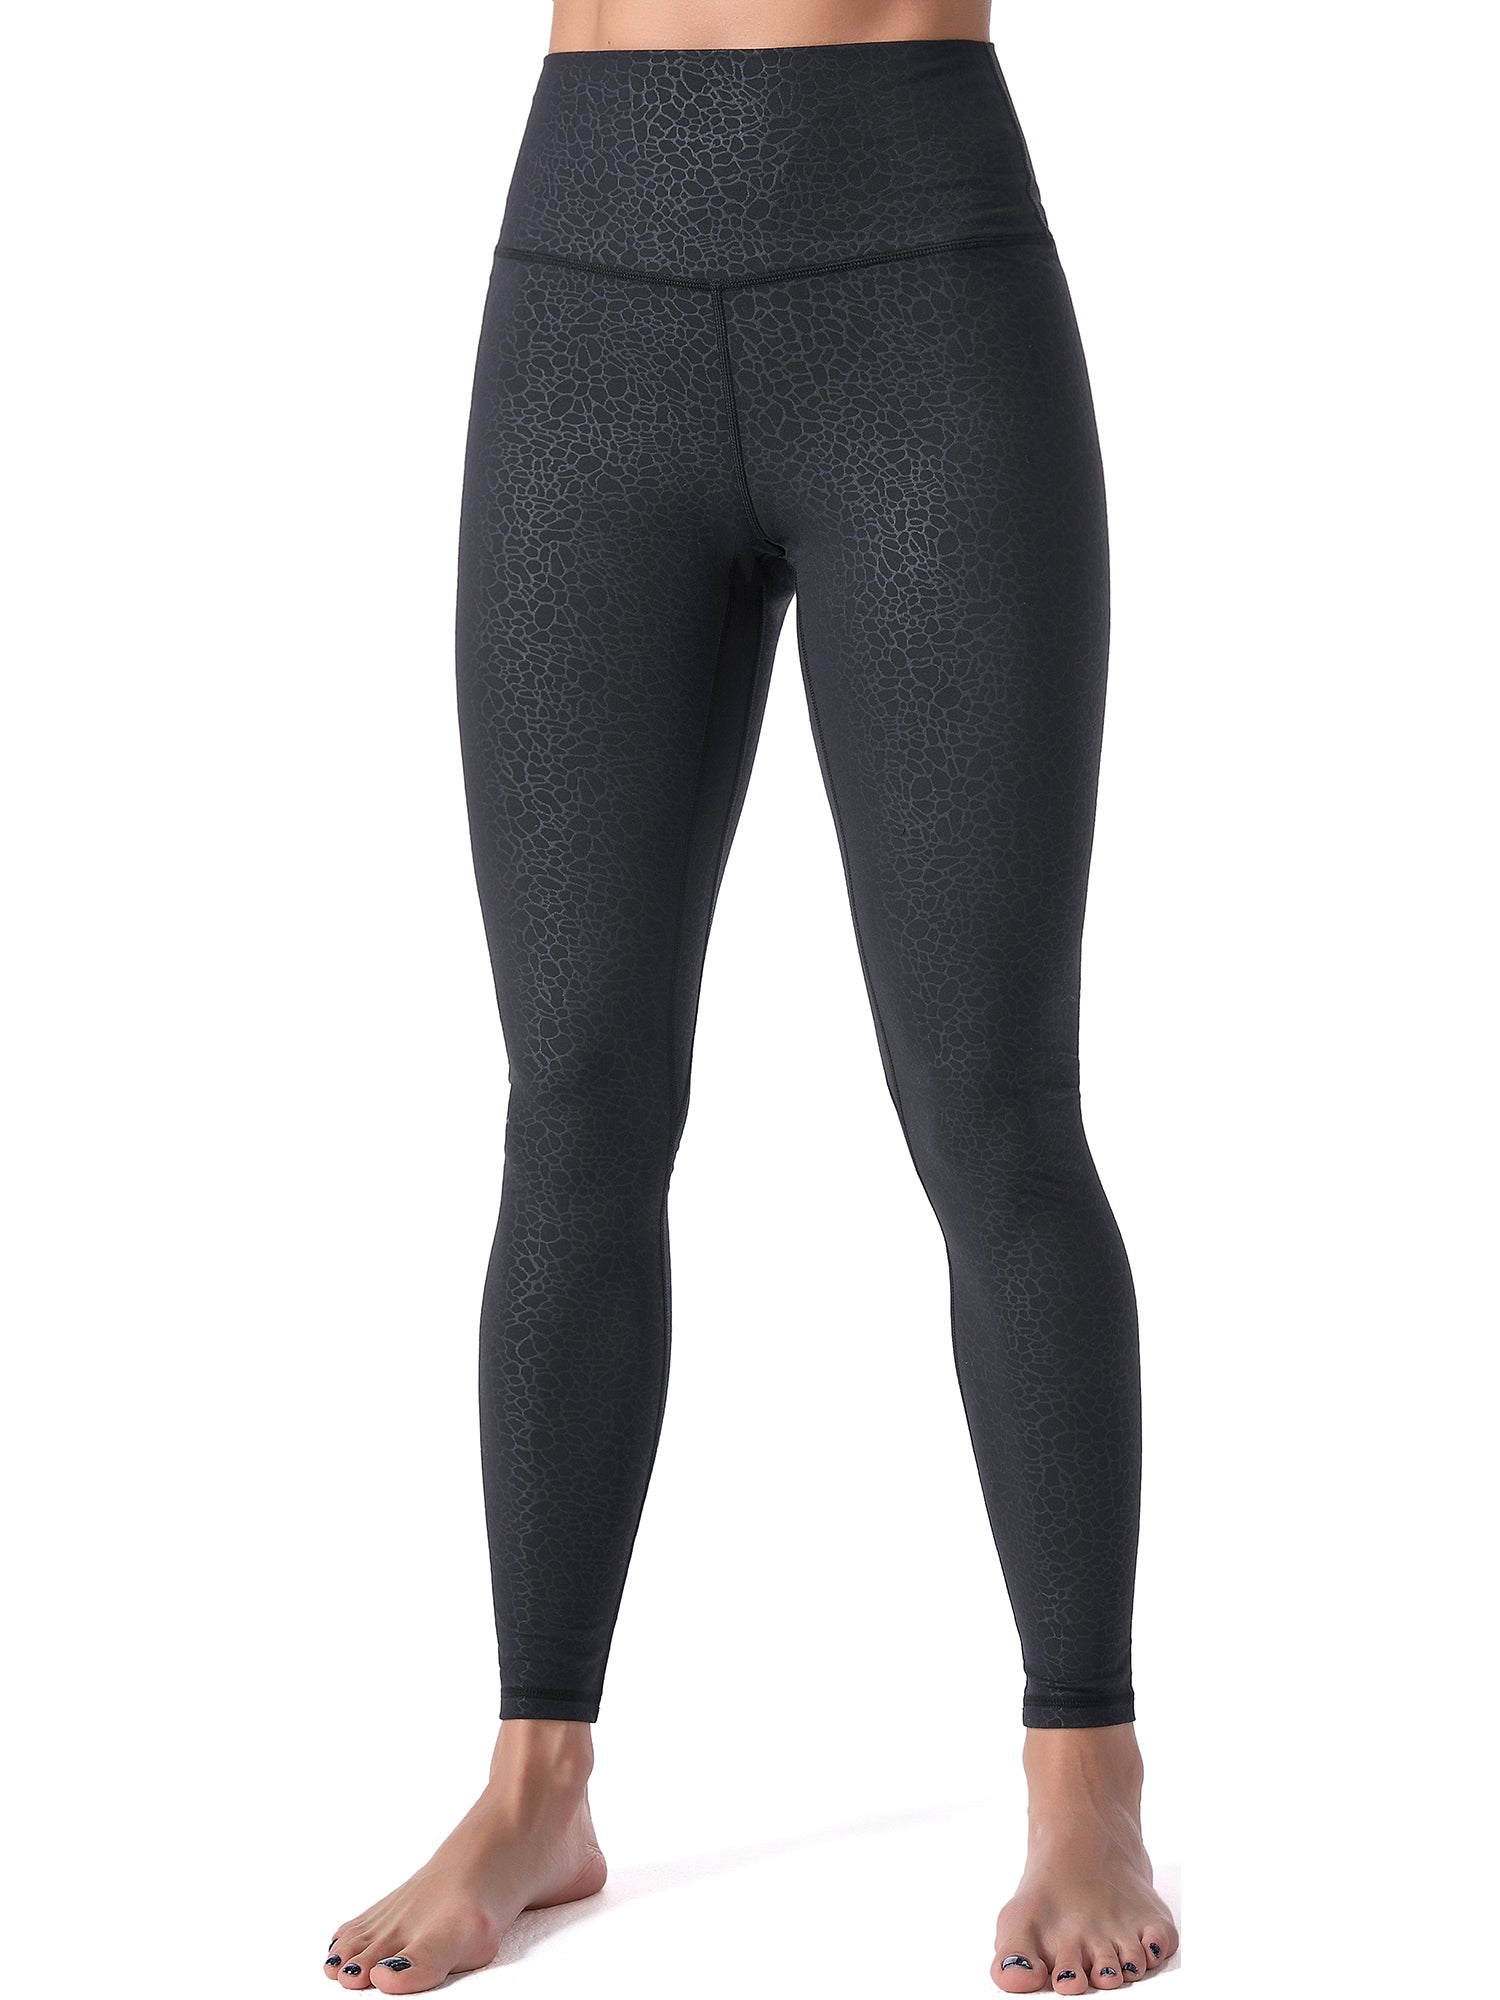 High Waist Tummy Control Leggings by Sunzel | Squat Proof, Buttery Soft,  Sweat Wicking, Breathable